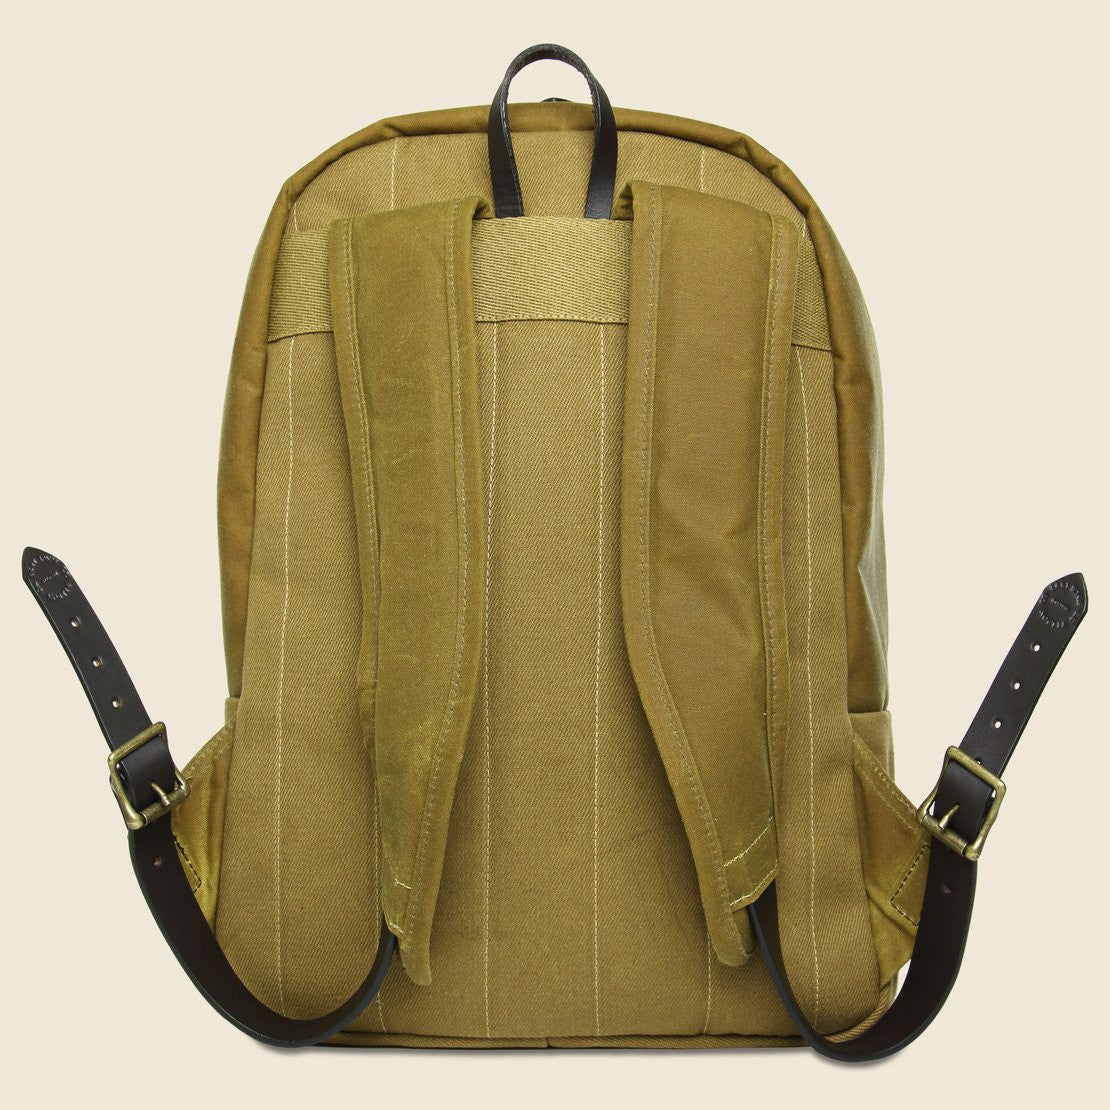 Tin Cloth Journeyman Backpack - Tan - Filson - STAG Provisions - Accessories - Bags / Luggage